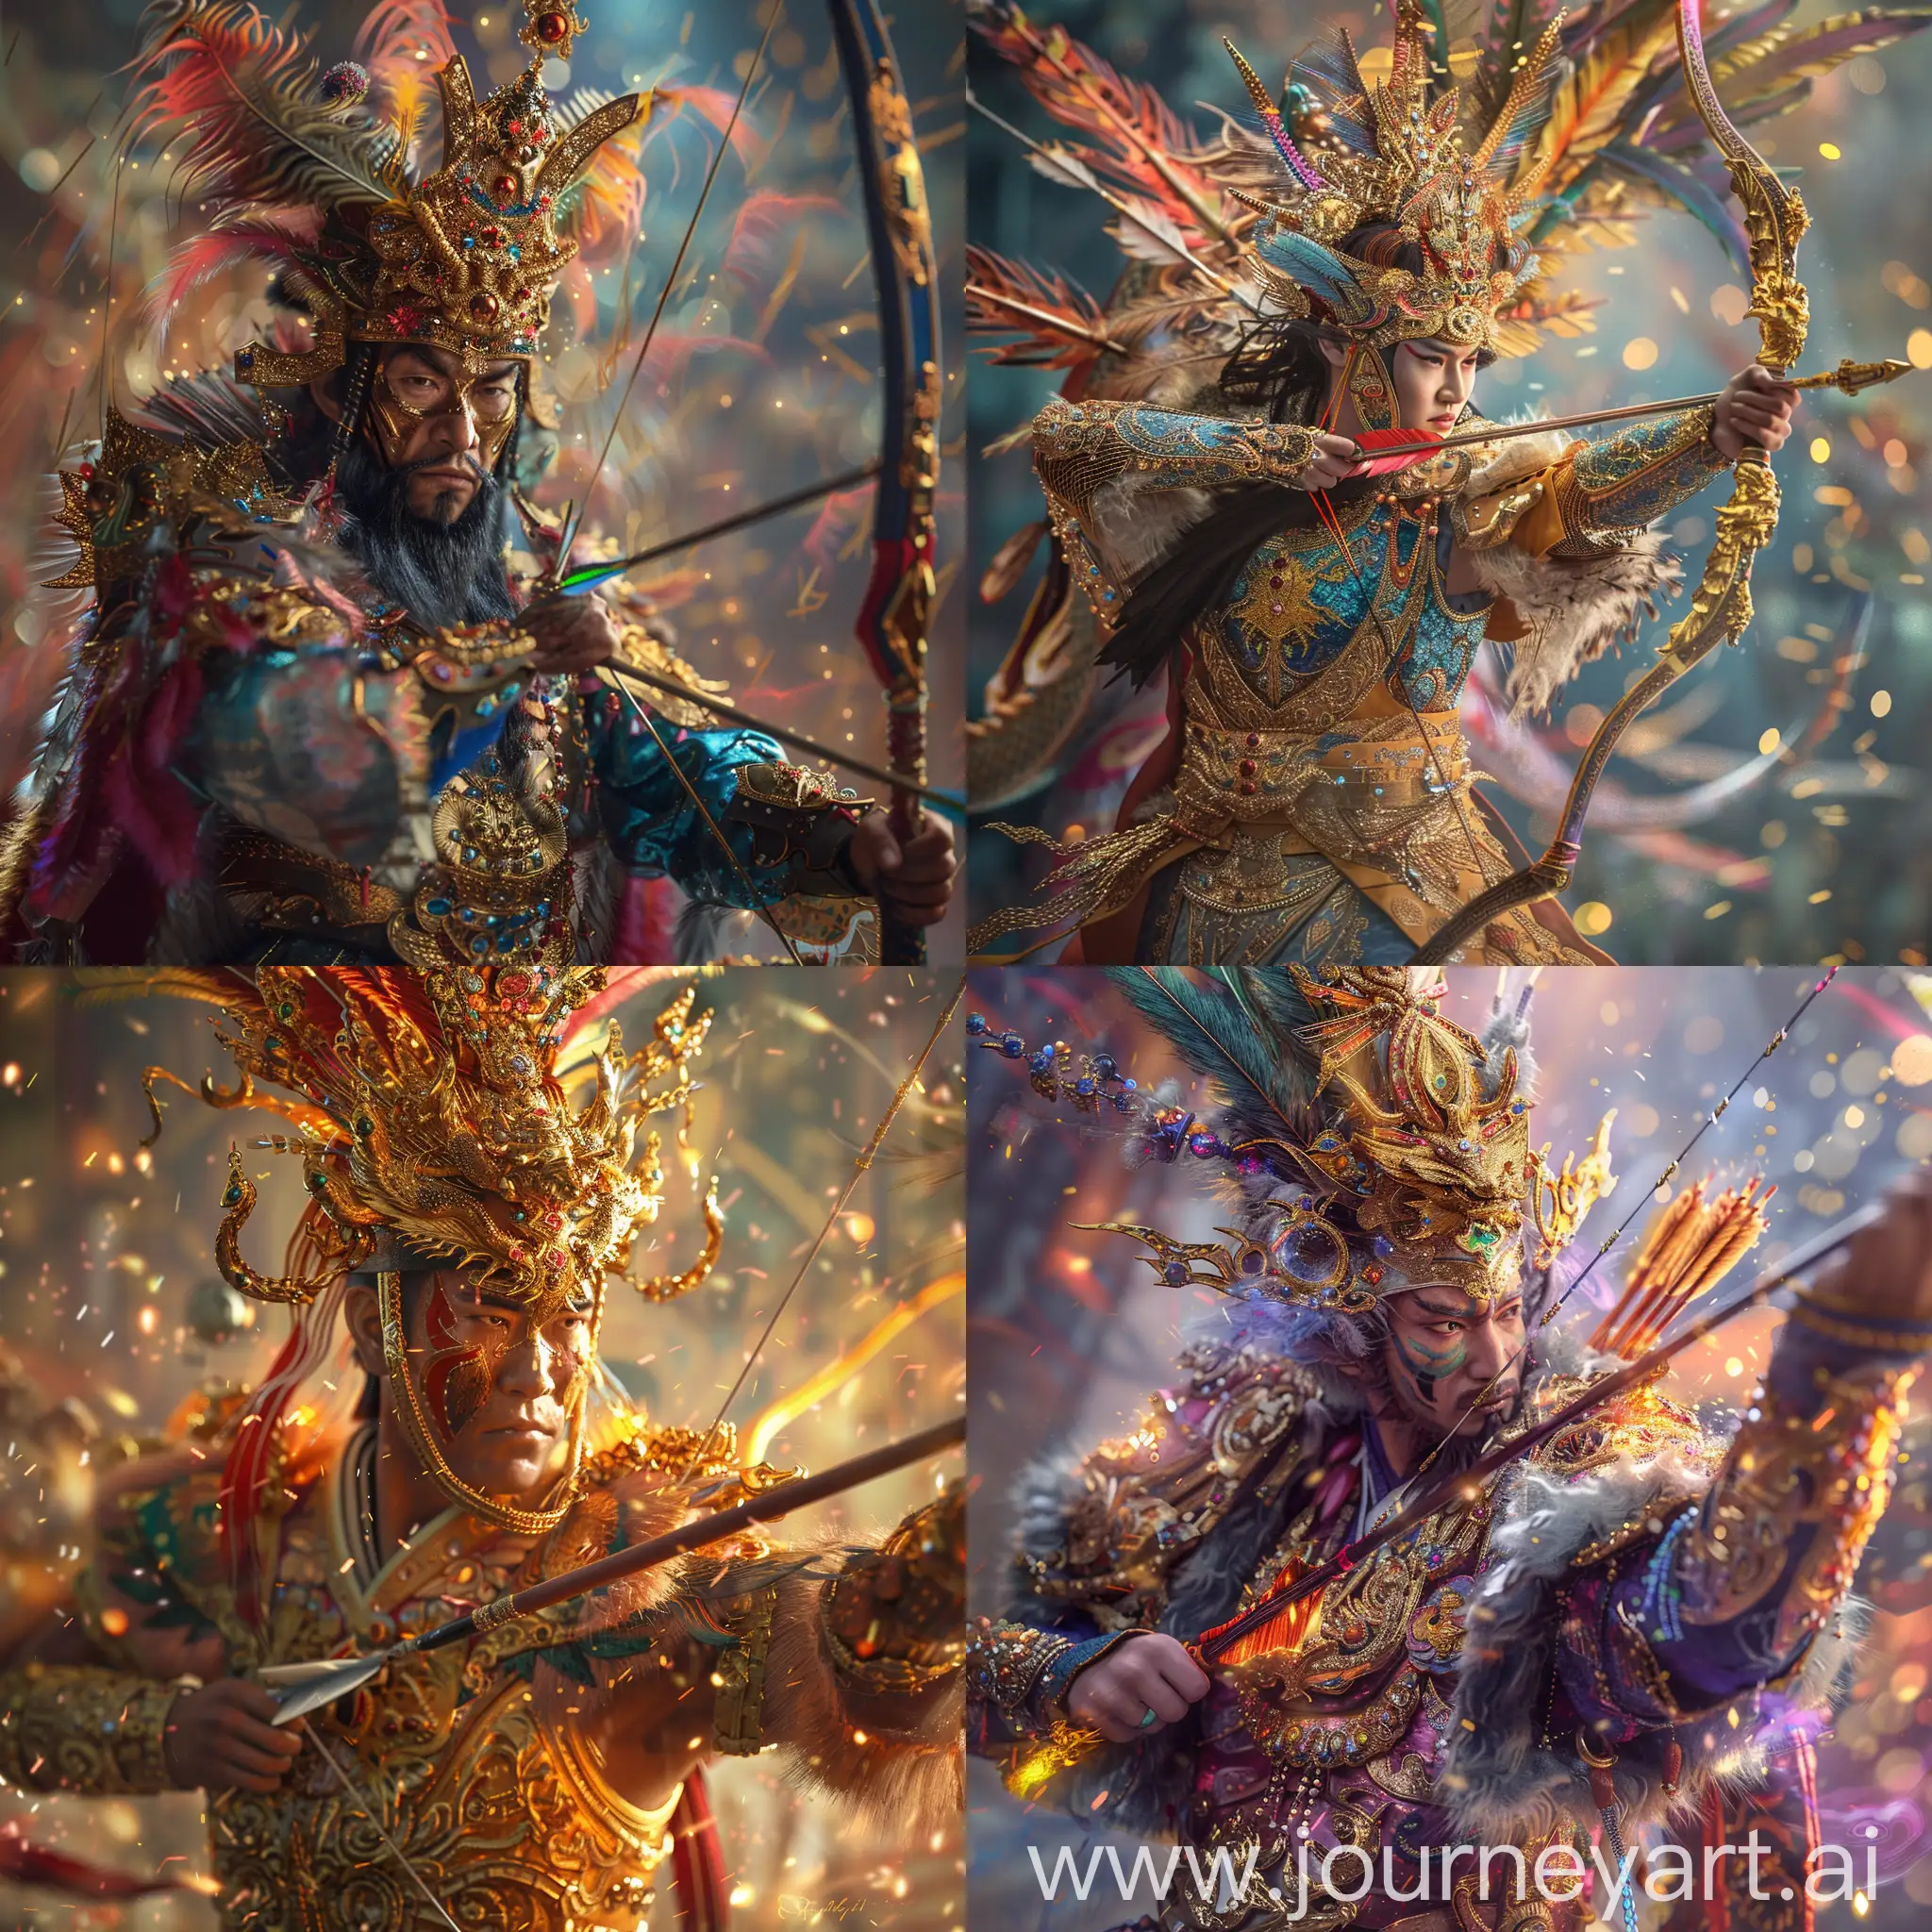 Royal-Regalia-Fantasy-Realistic-Tajik-Wrestlers-and-King-Heroes-Rising-in-Armor-with-Dragon-Bow-and-Aura-of-Fire